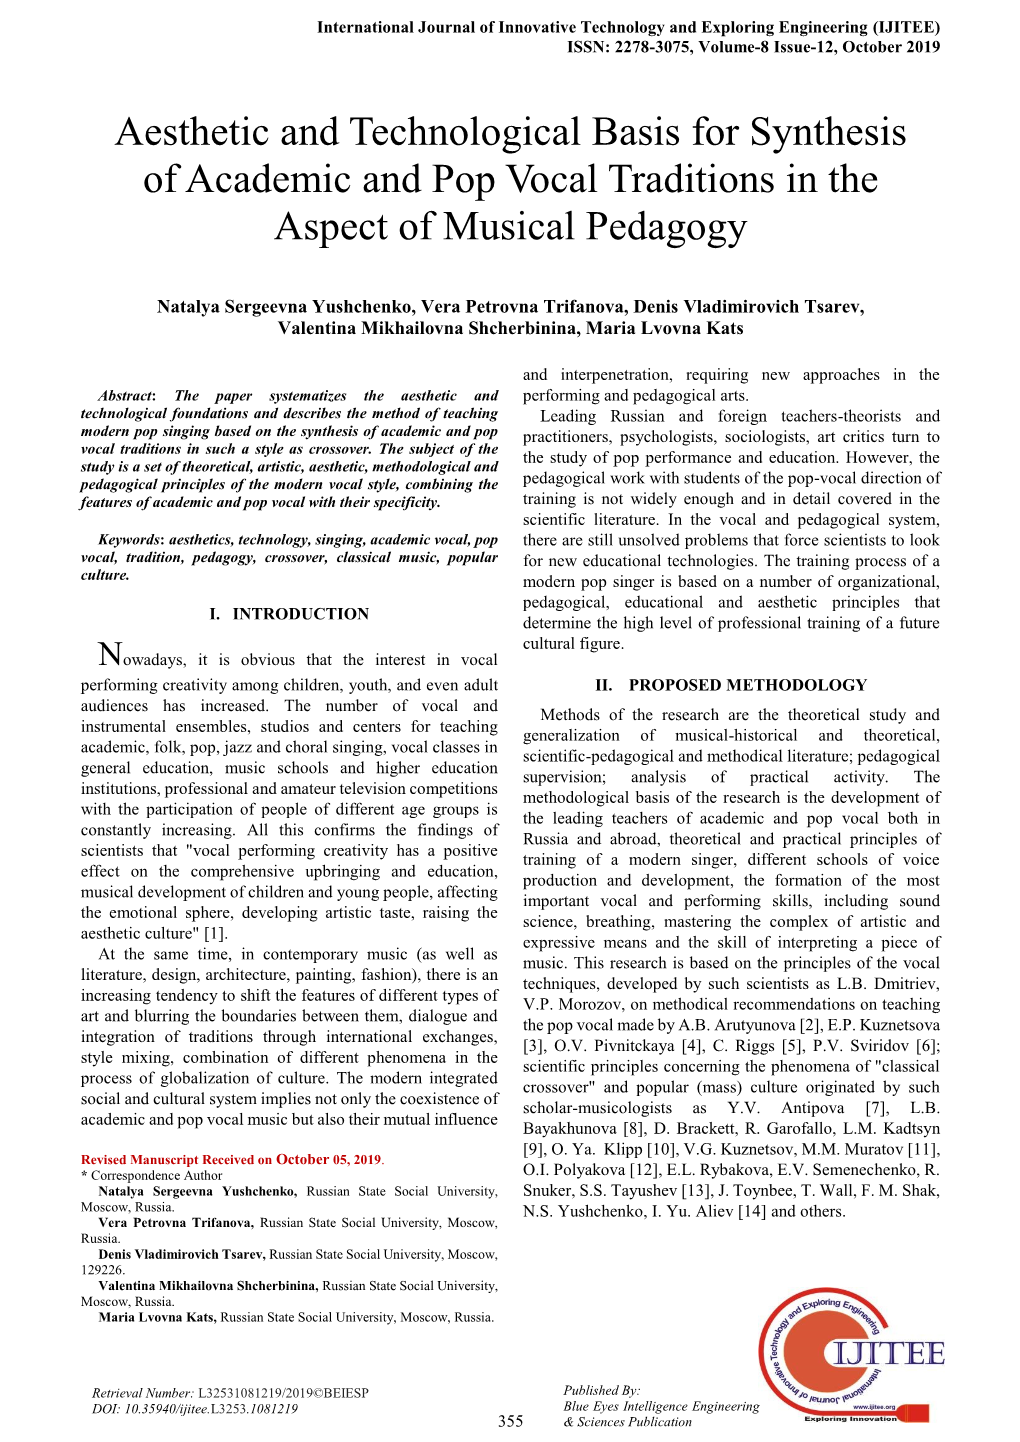 Aesthetic and Technological Basis for Synthesis of Academic and Pop Vocal Traditions in the Aspect of Musical Pedagogy